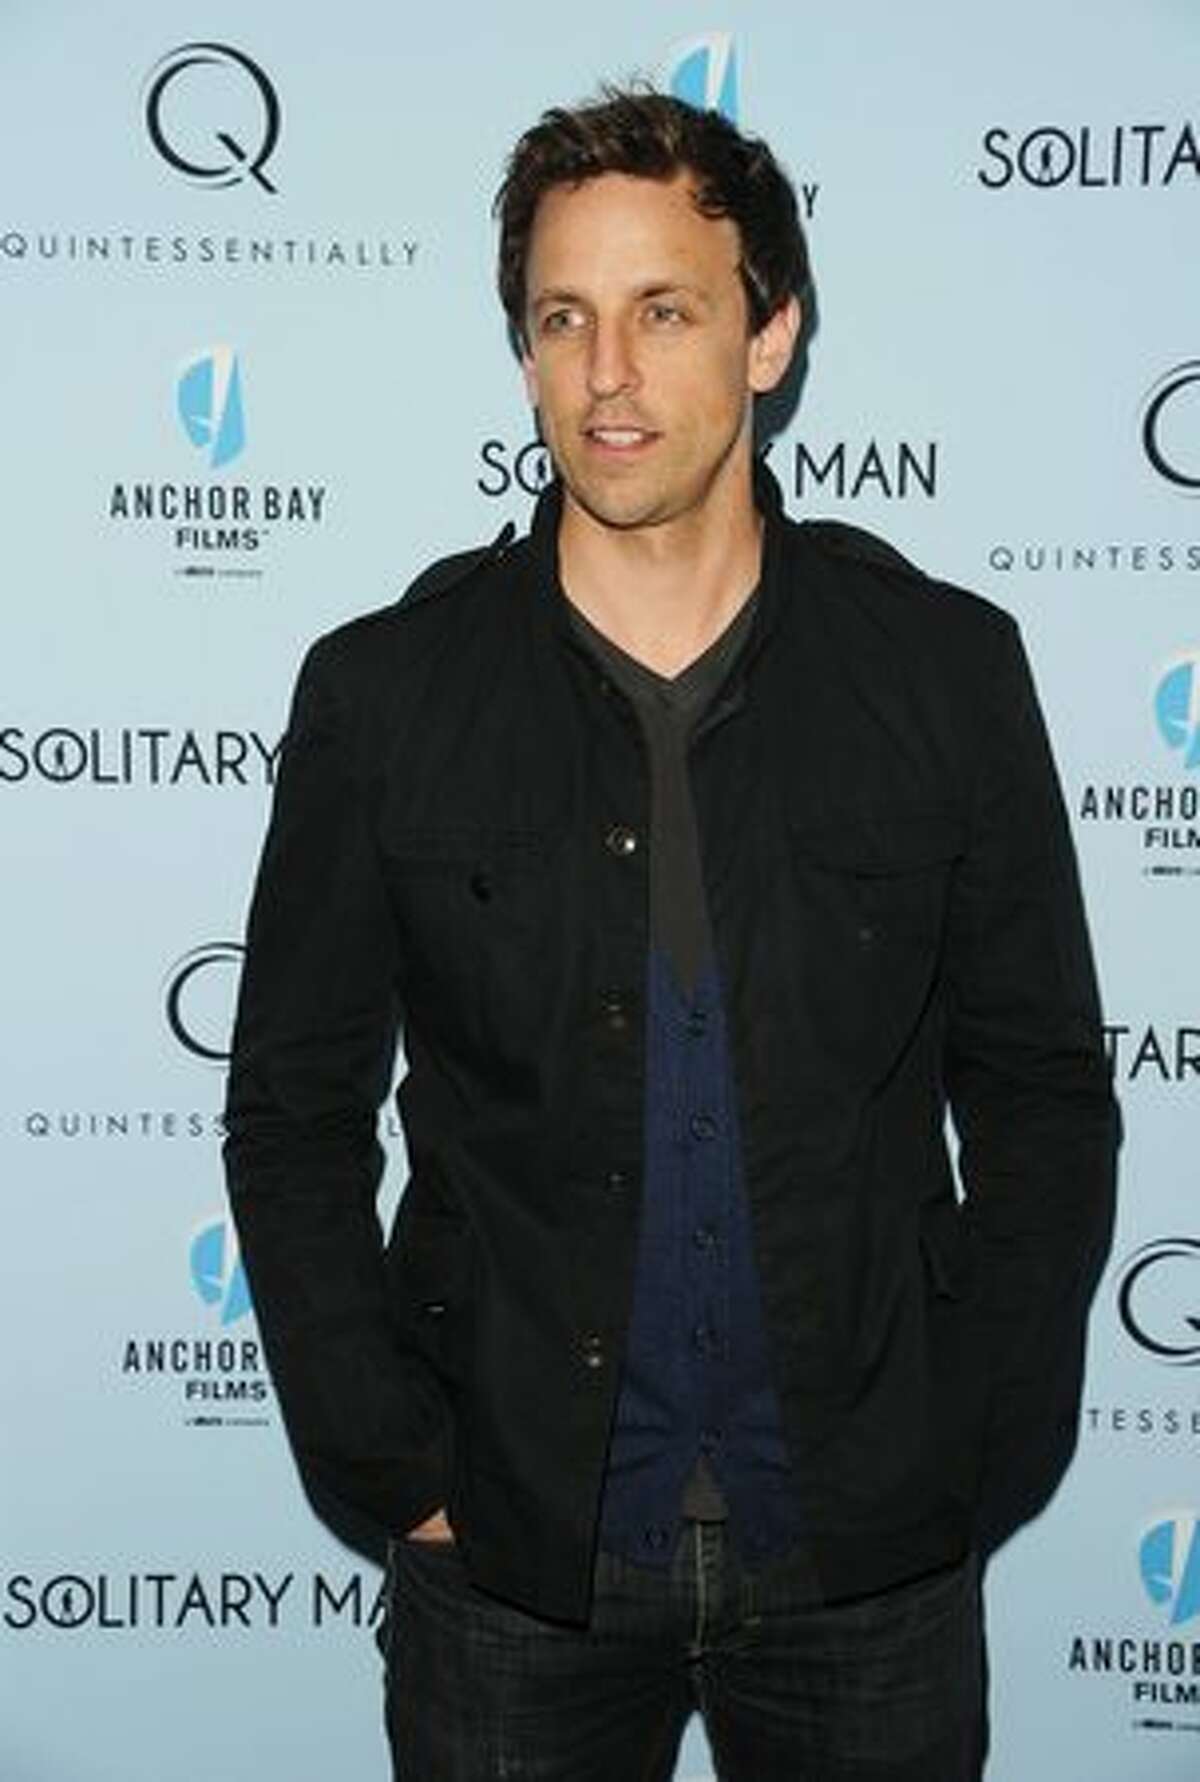 Actor Seth Meyers attends the premiere of "Solitary Man" at Cinema 2 on May 11, 2010 in New York City.